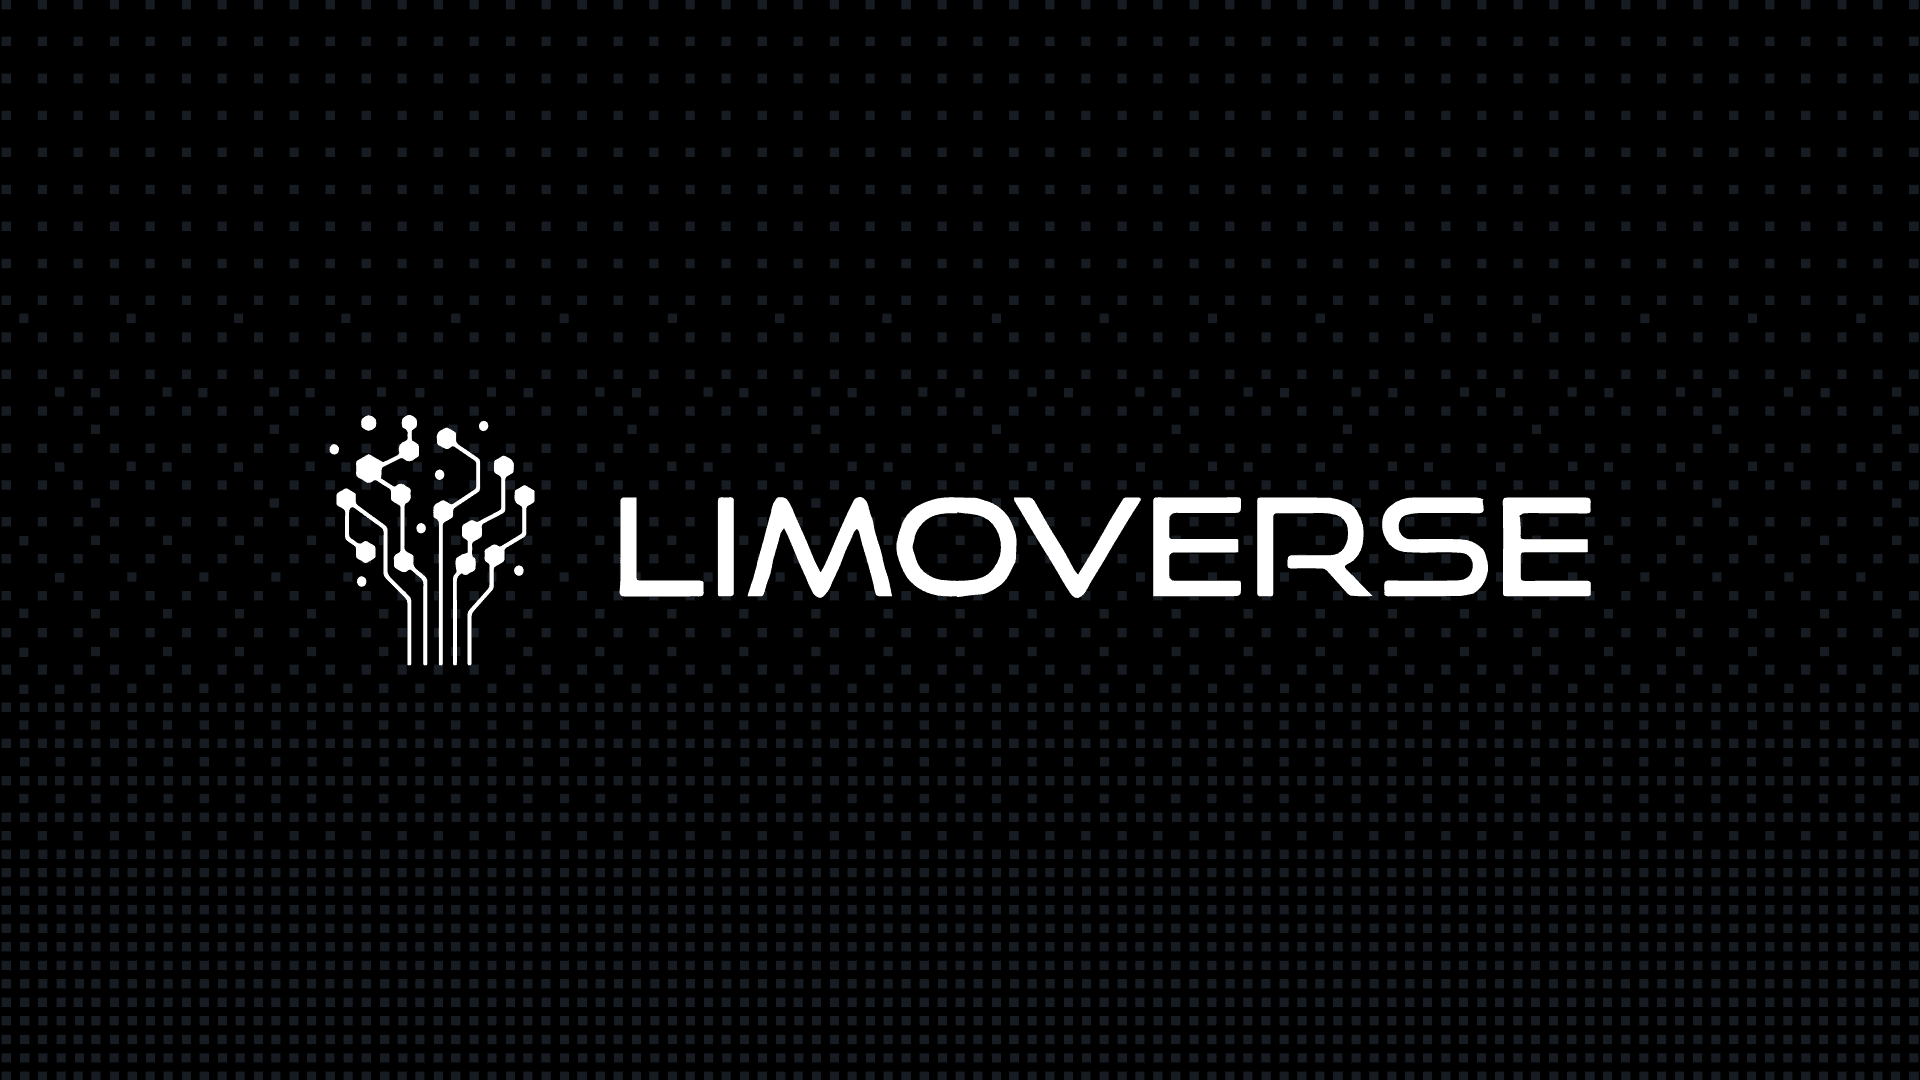 Limoverse: Blockchain Technology in Healthcare Sector